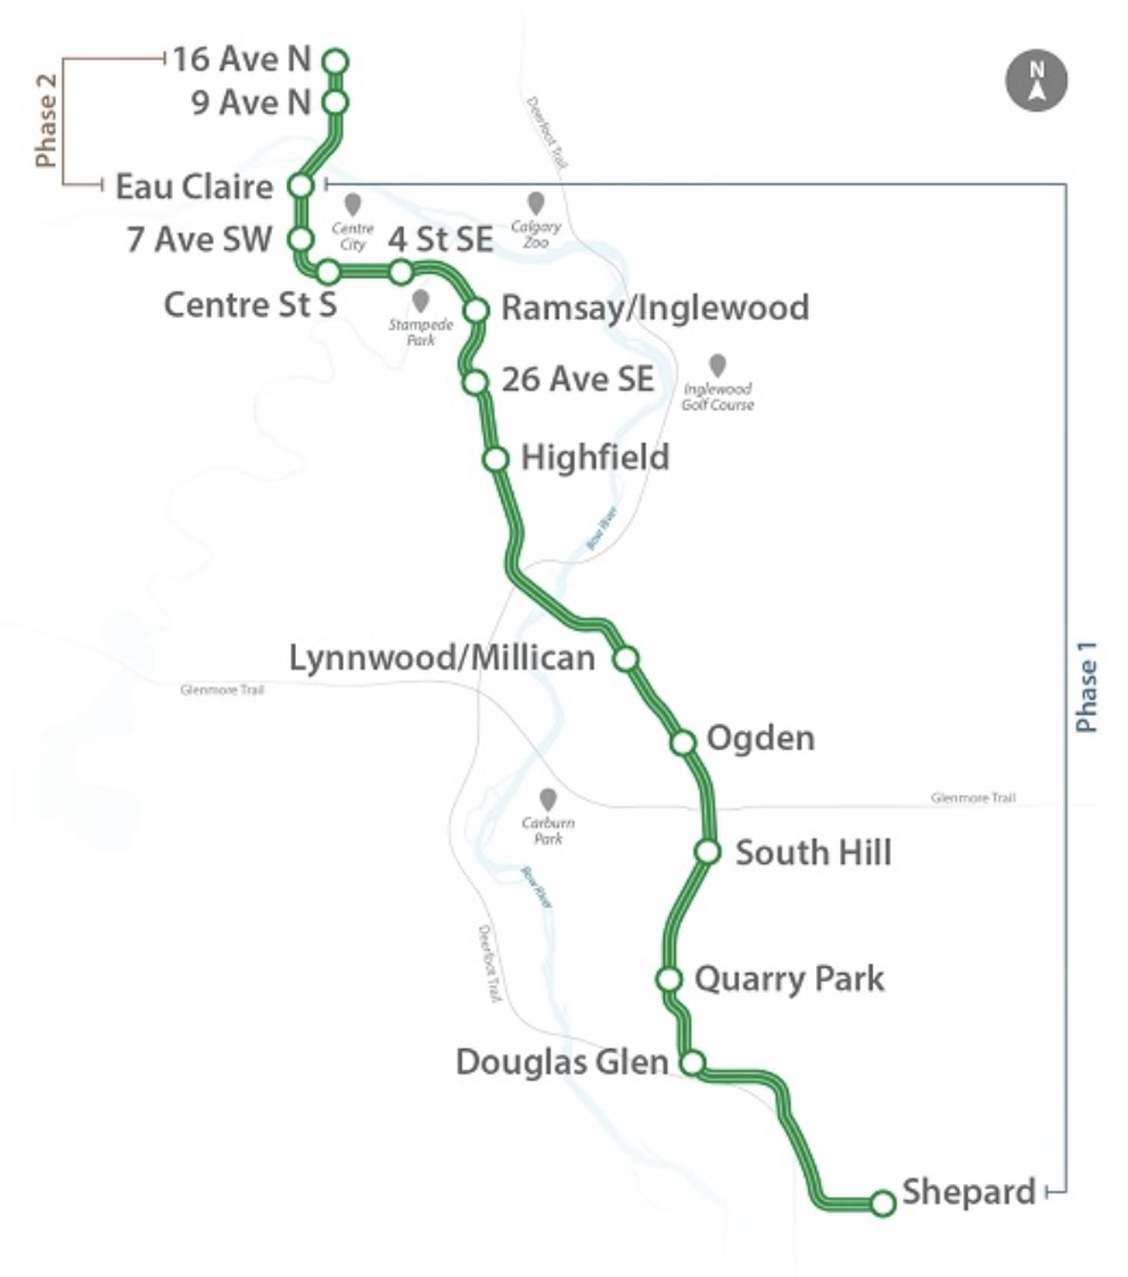 Map from the City of Calgary showing the first and second phases of the Green Line LRT.